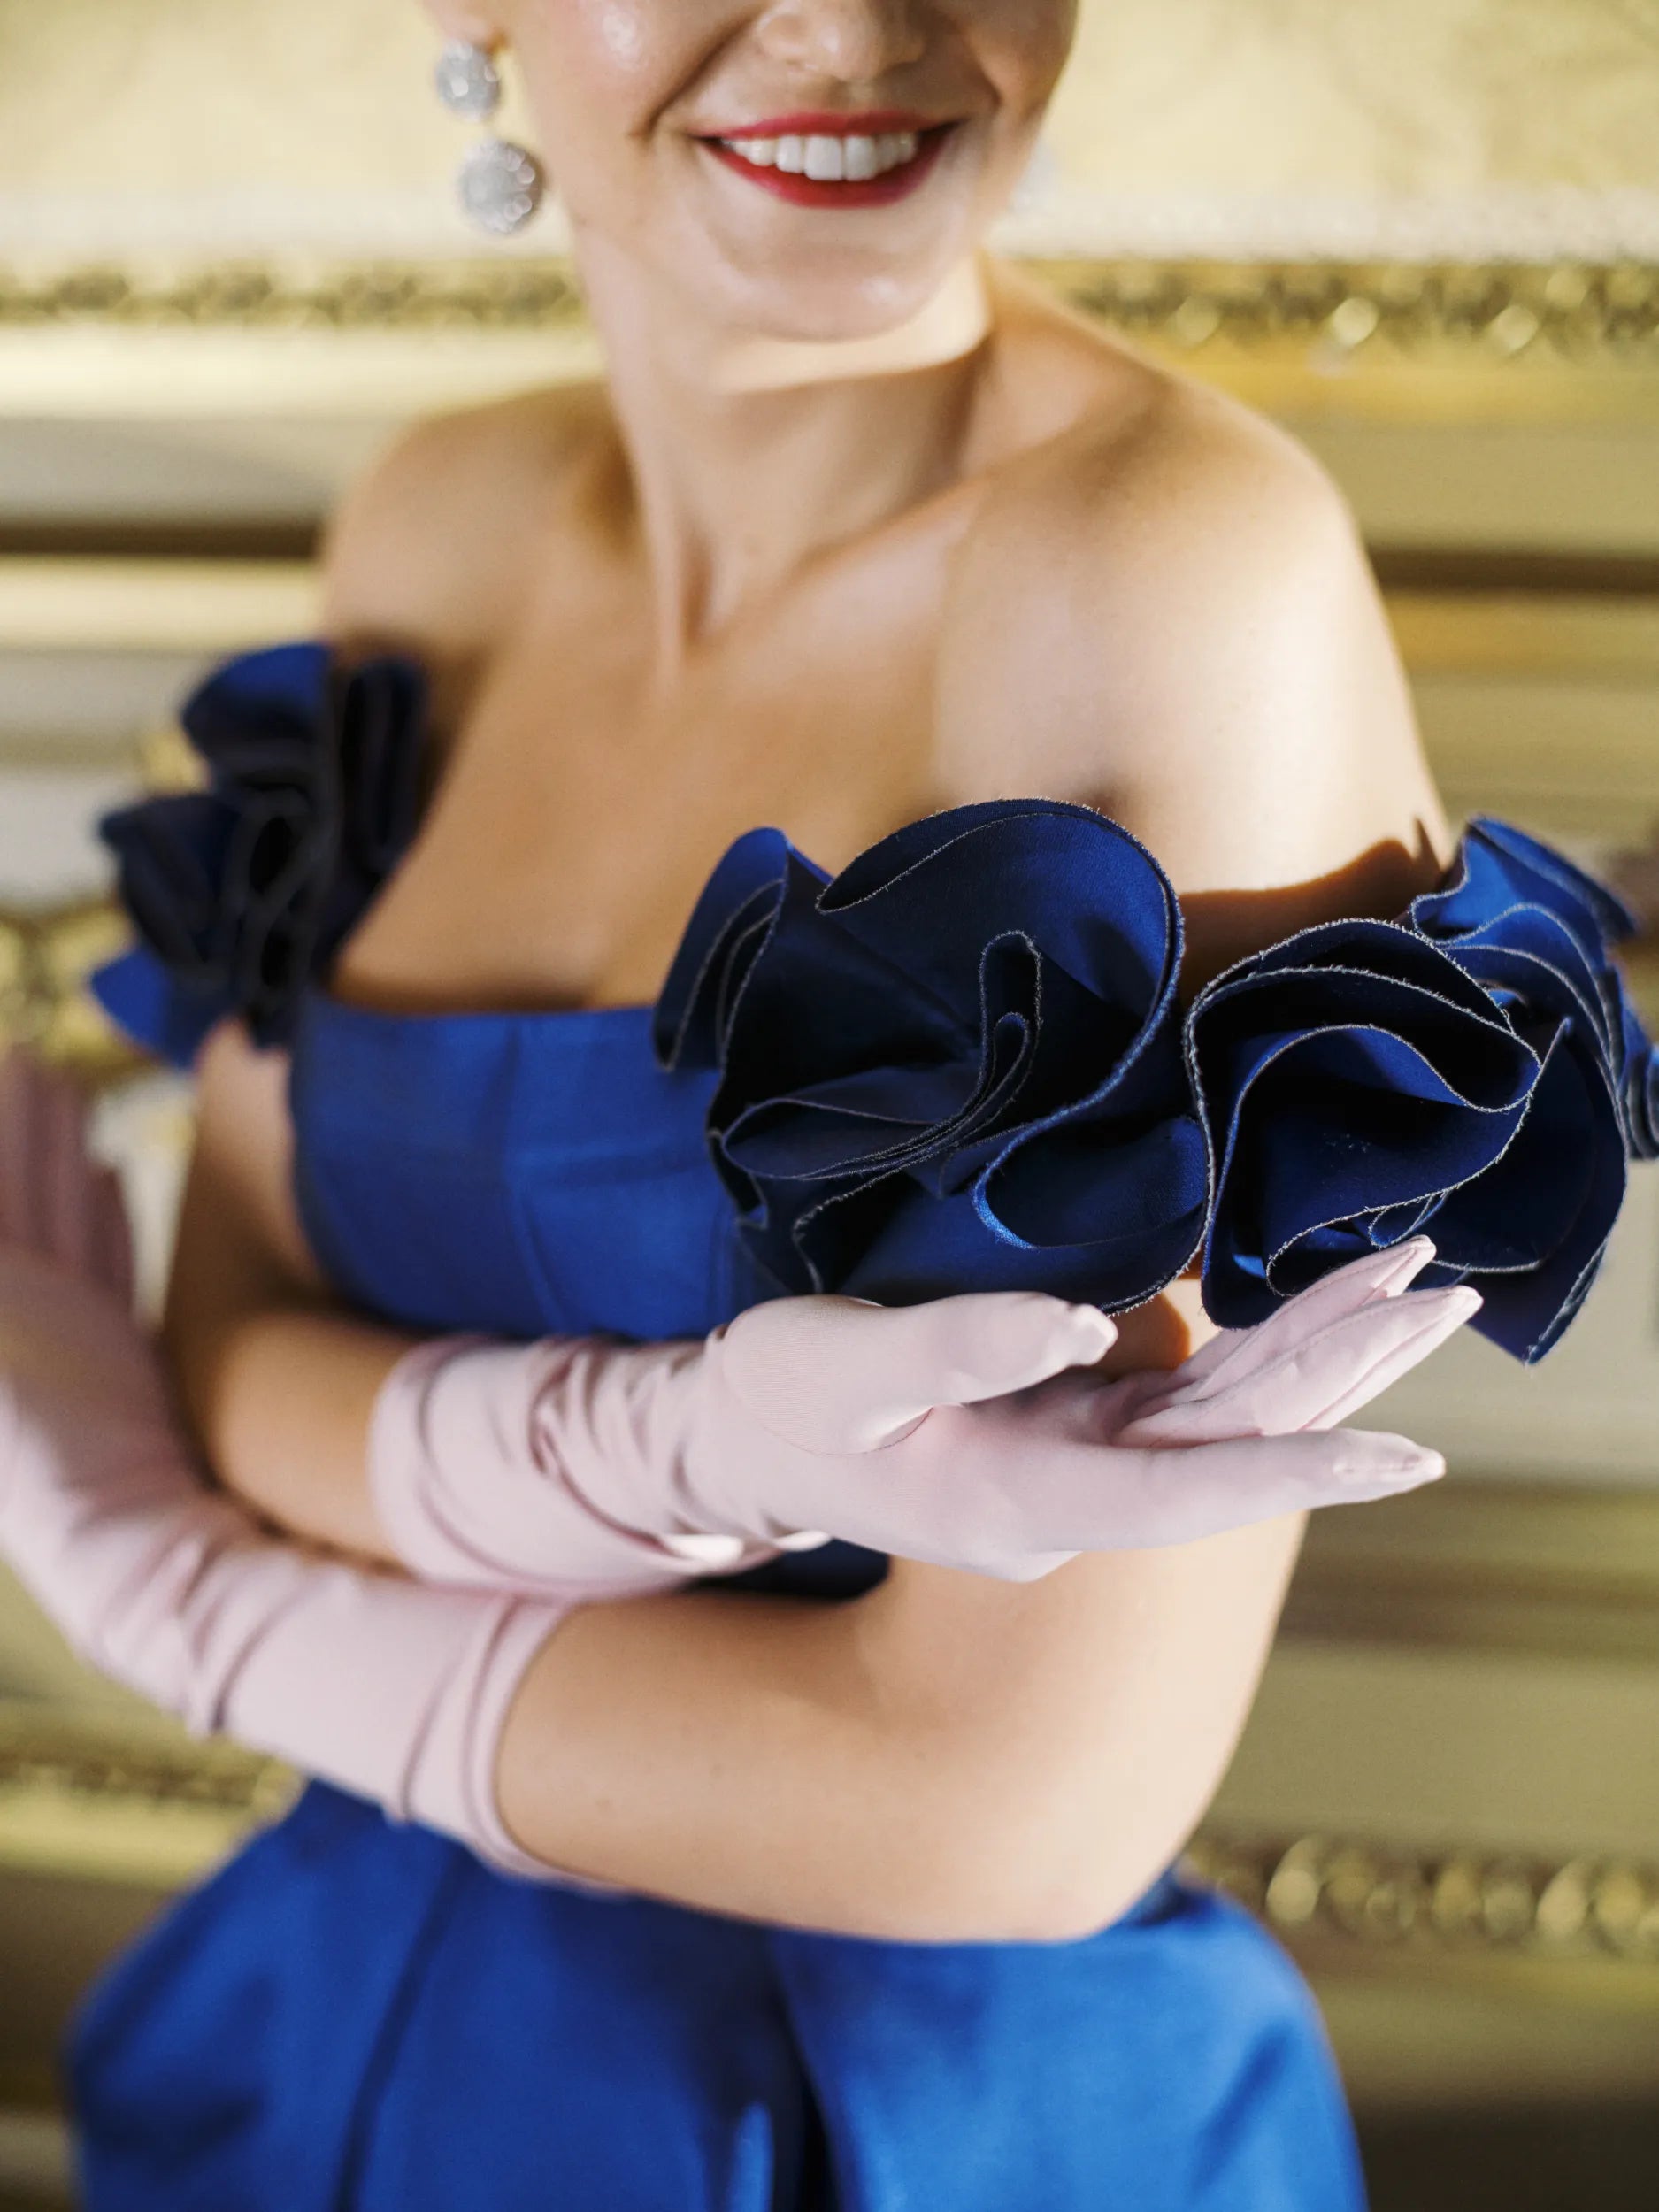 Woman smiling showing her pink formal gloves.